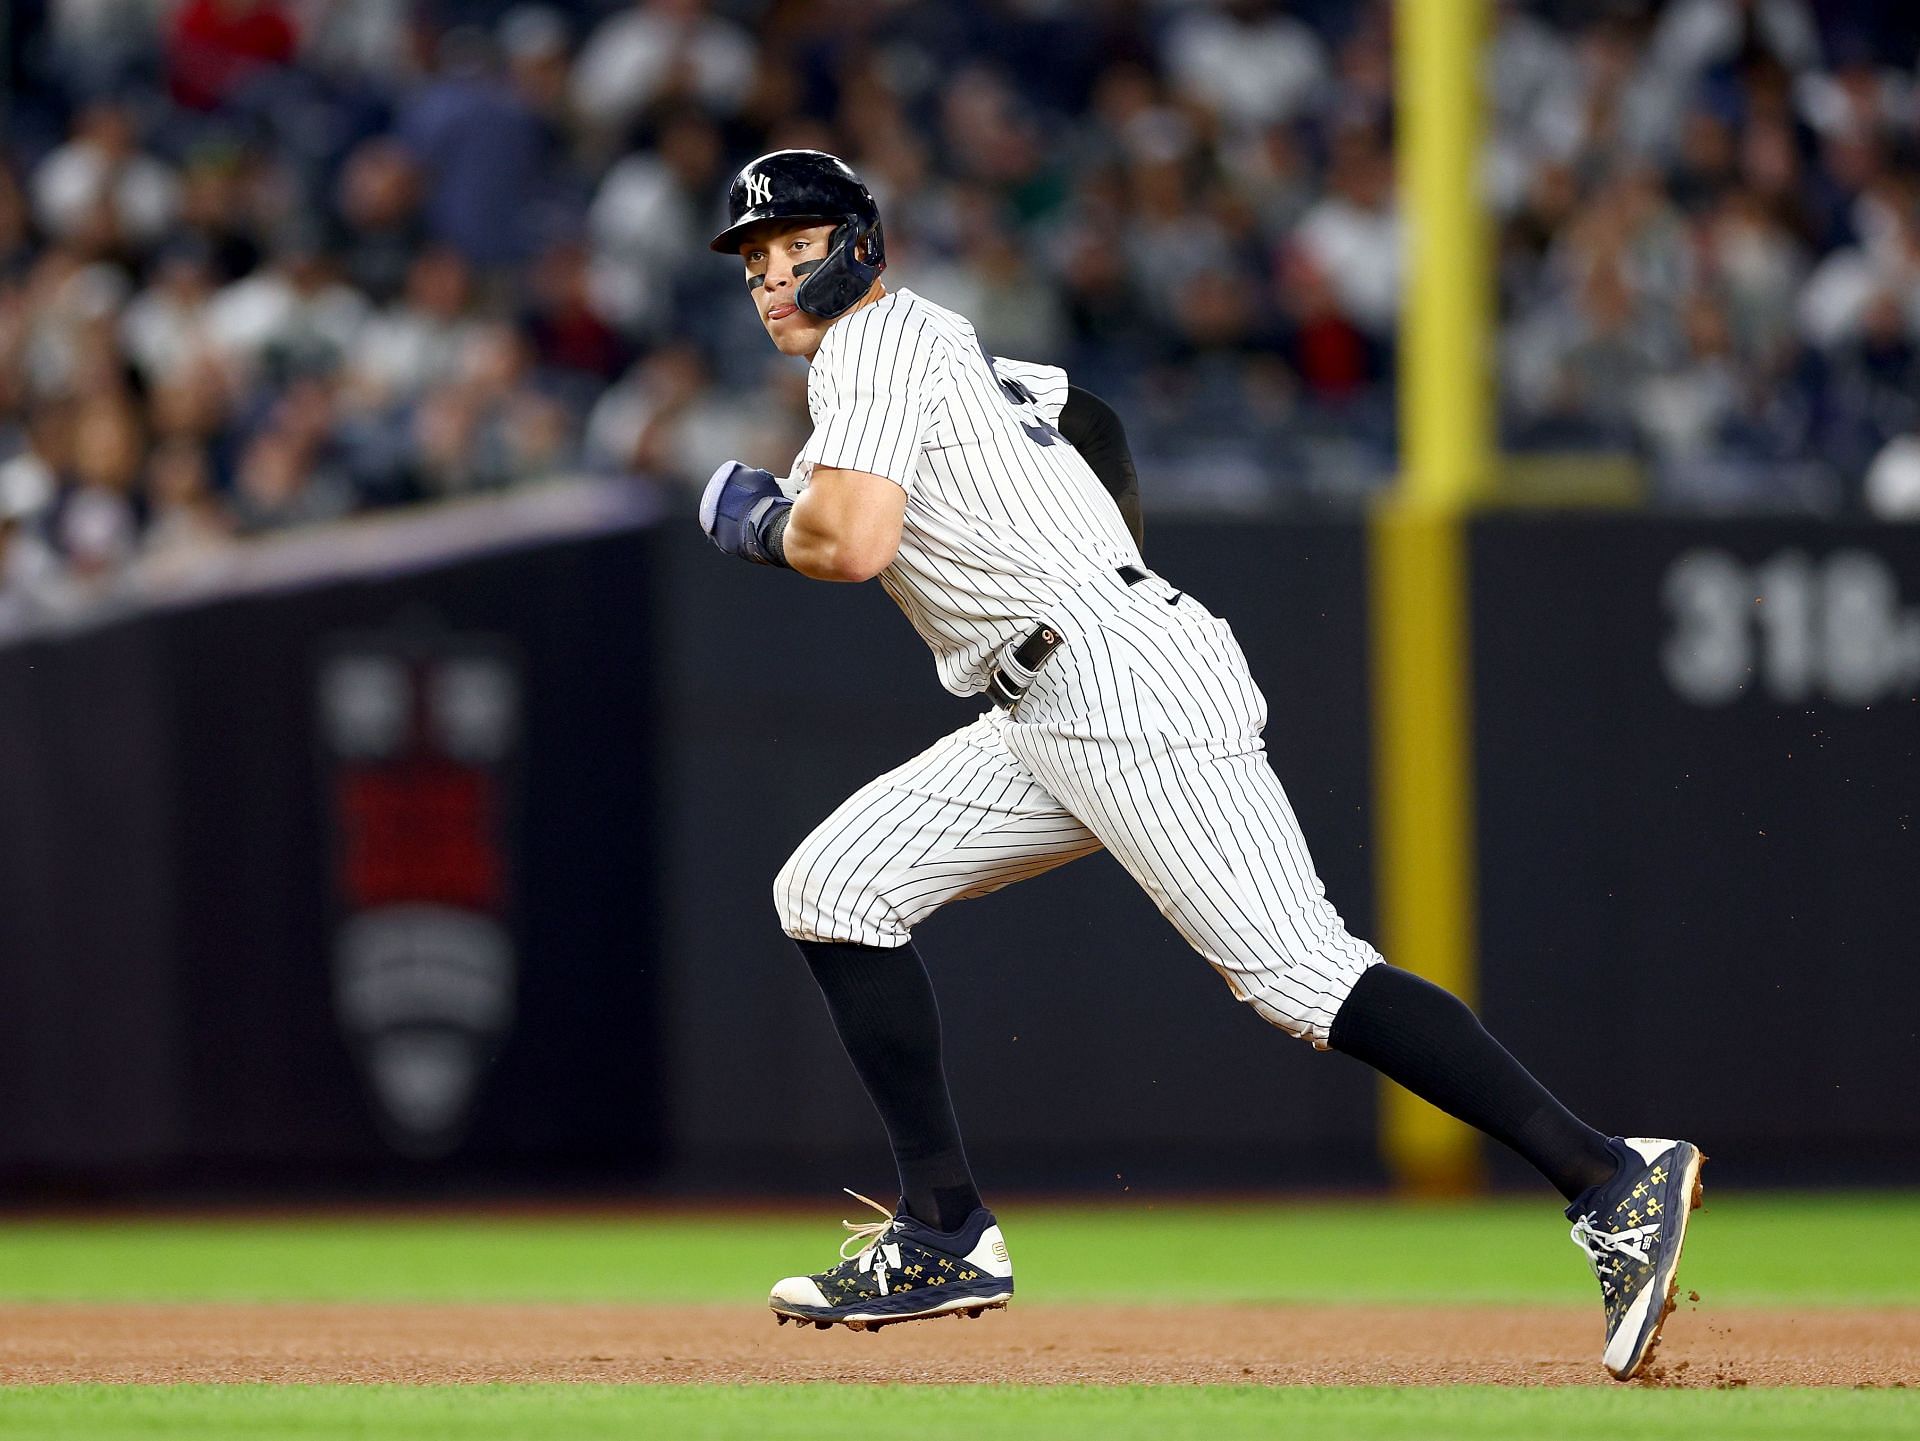 Aaron Judge is 2 for 11 since hitting his 60th home run.